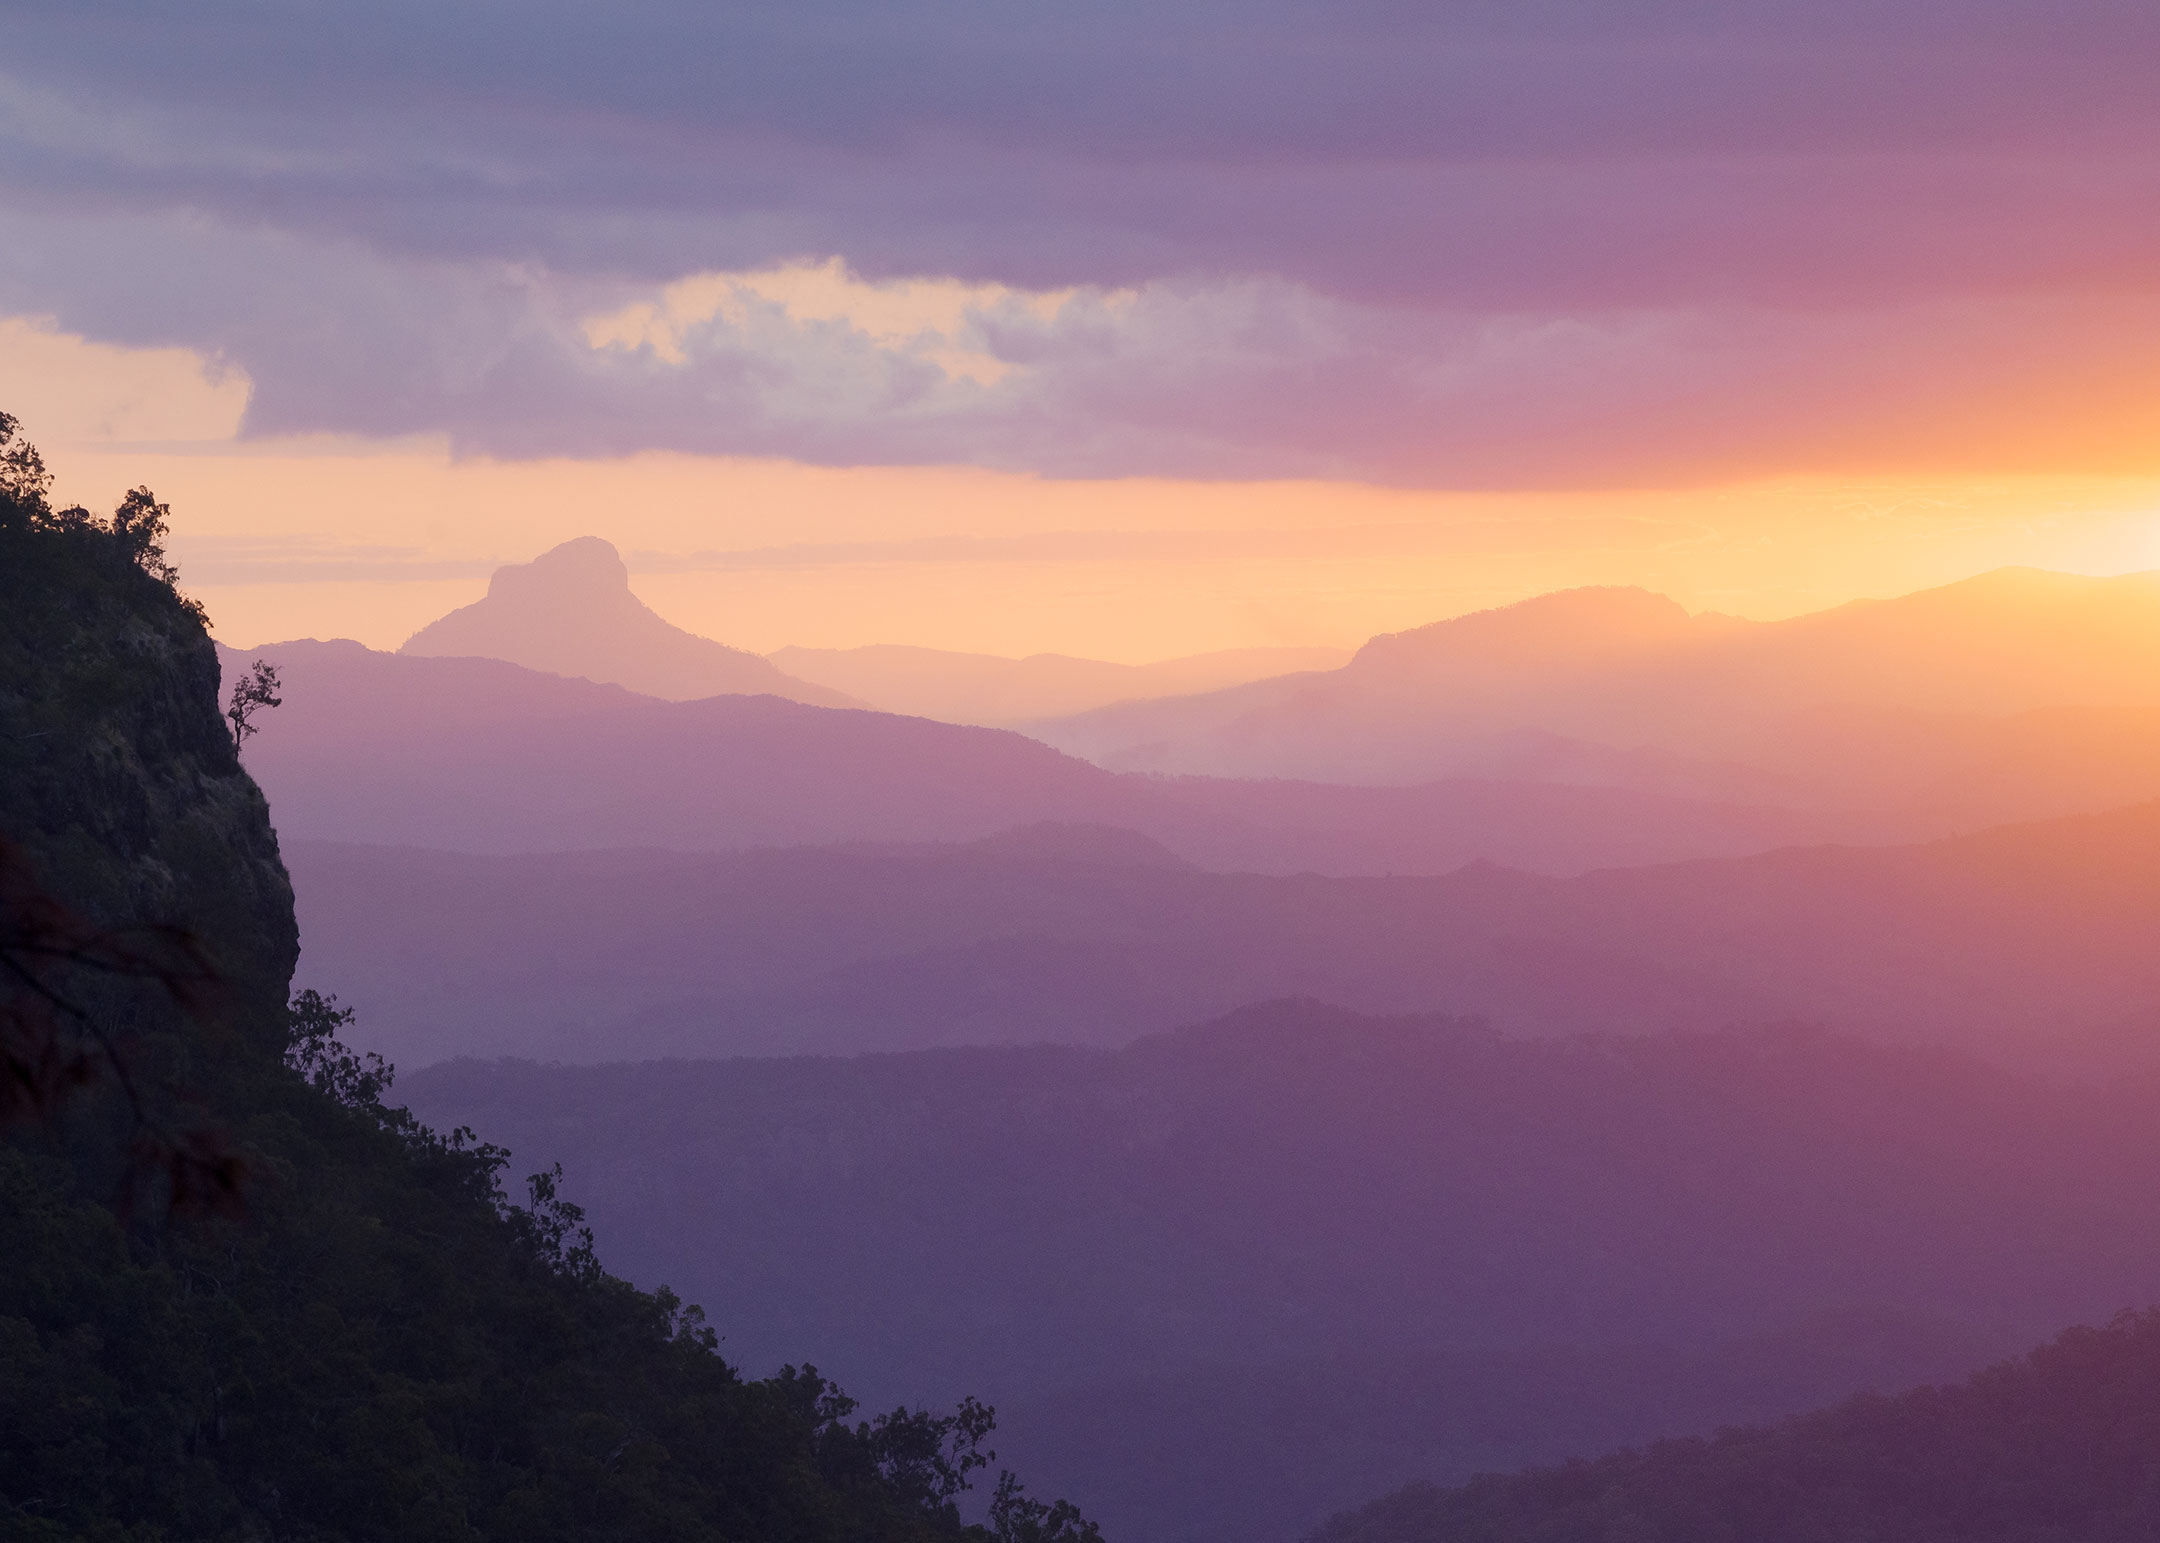 A pink sunset over the Scenic Rim, from Lamington National Park, Australia